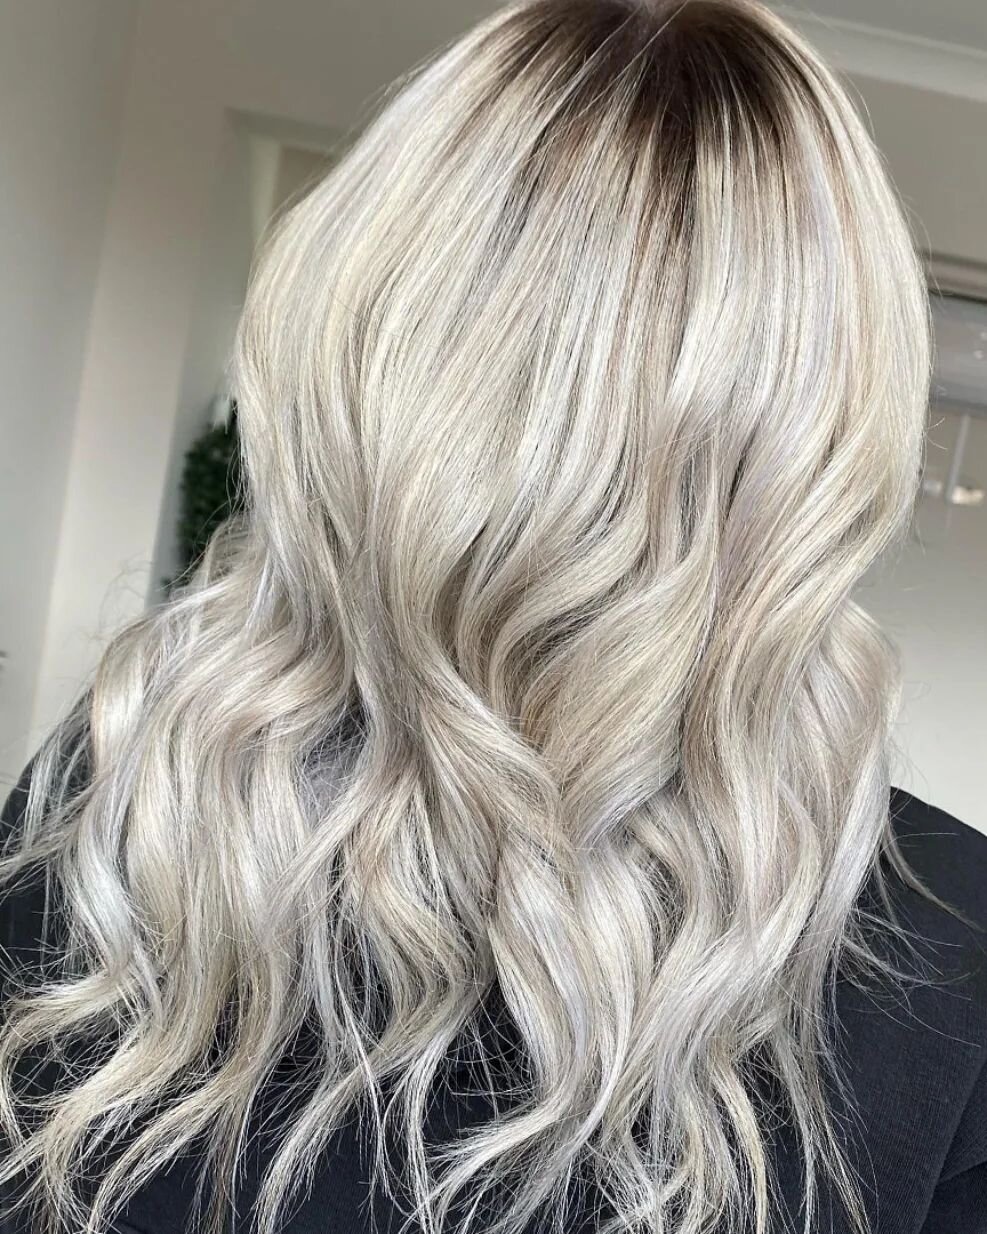 When other clients in the Salon start asking 'Would that lady's colour be possible on my hair?' you KNOW  @justinemayled_hairstylist has just achieved Hair Goals! ❄

#balayagebournemouth #bournemouthbalayage #balayageinbournemouth #bestbalayageinbour